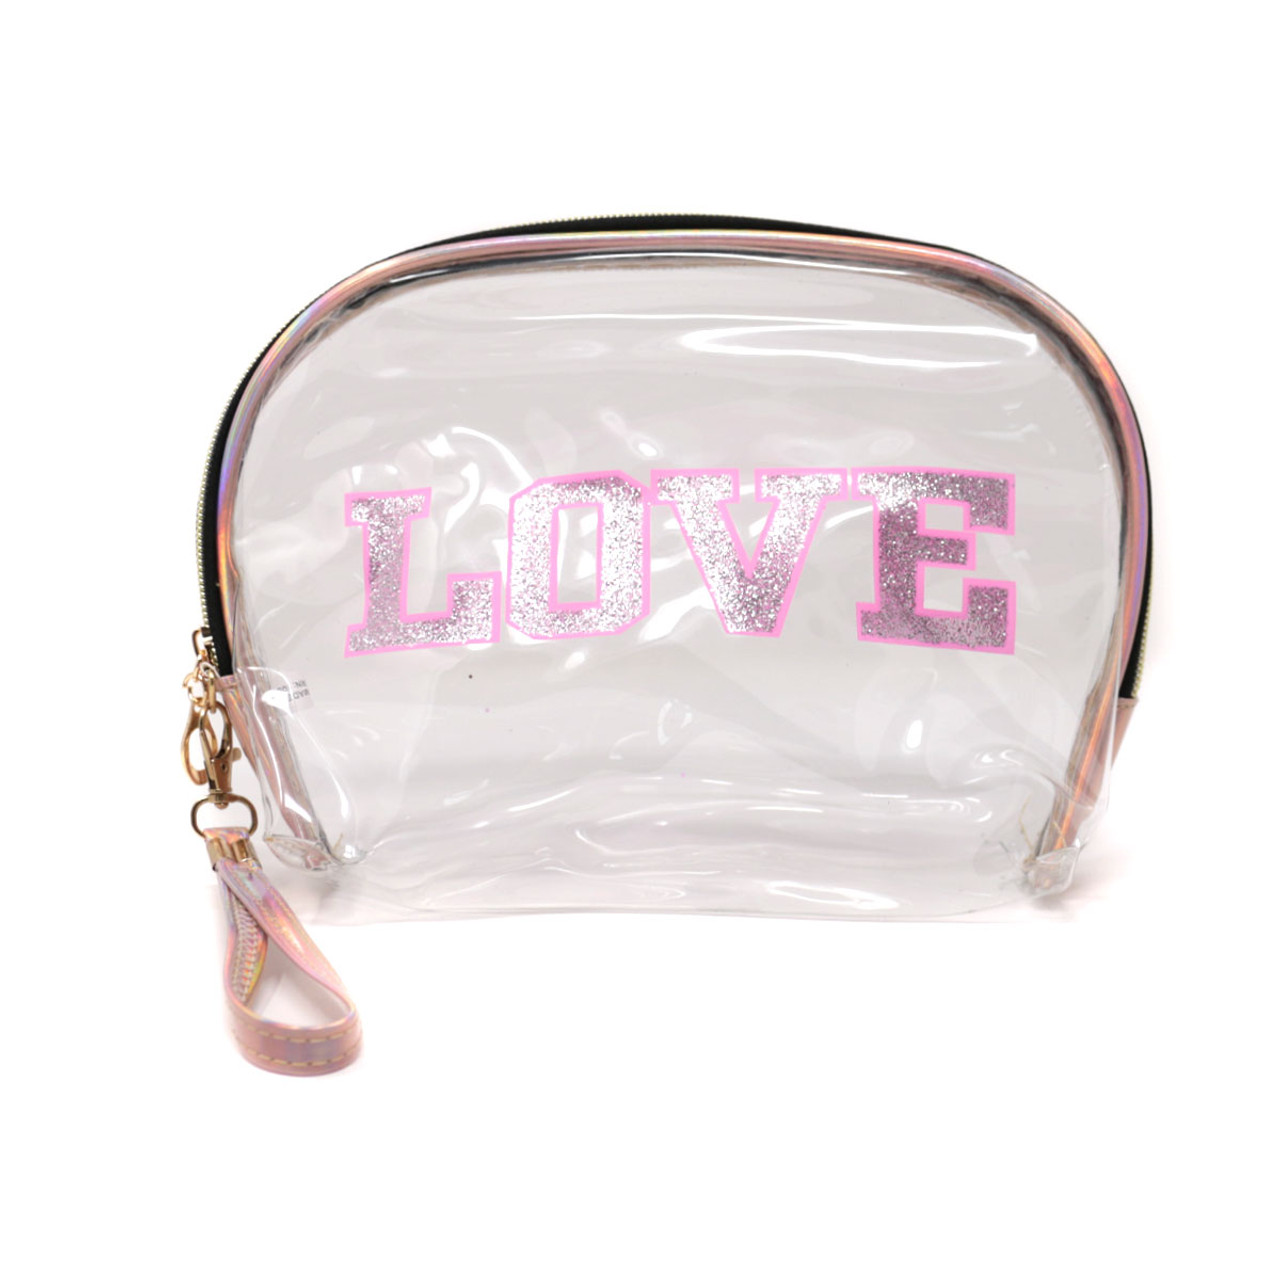 Victoria's Secret, Bags, Victorias Secret Crossbody Small Pink Purse Bag  With Glitter Shimmer Patches